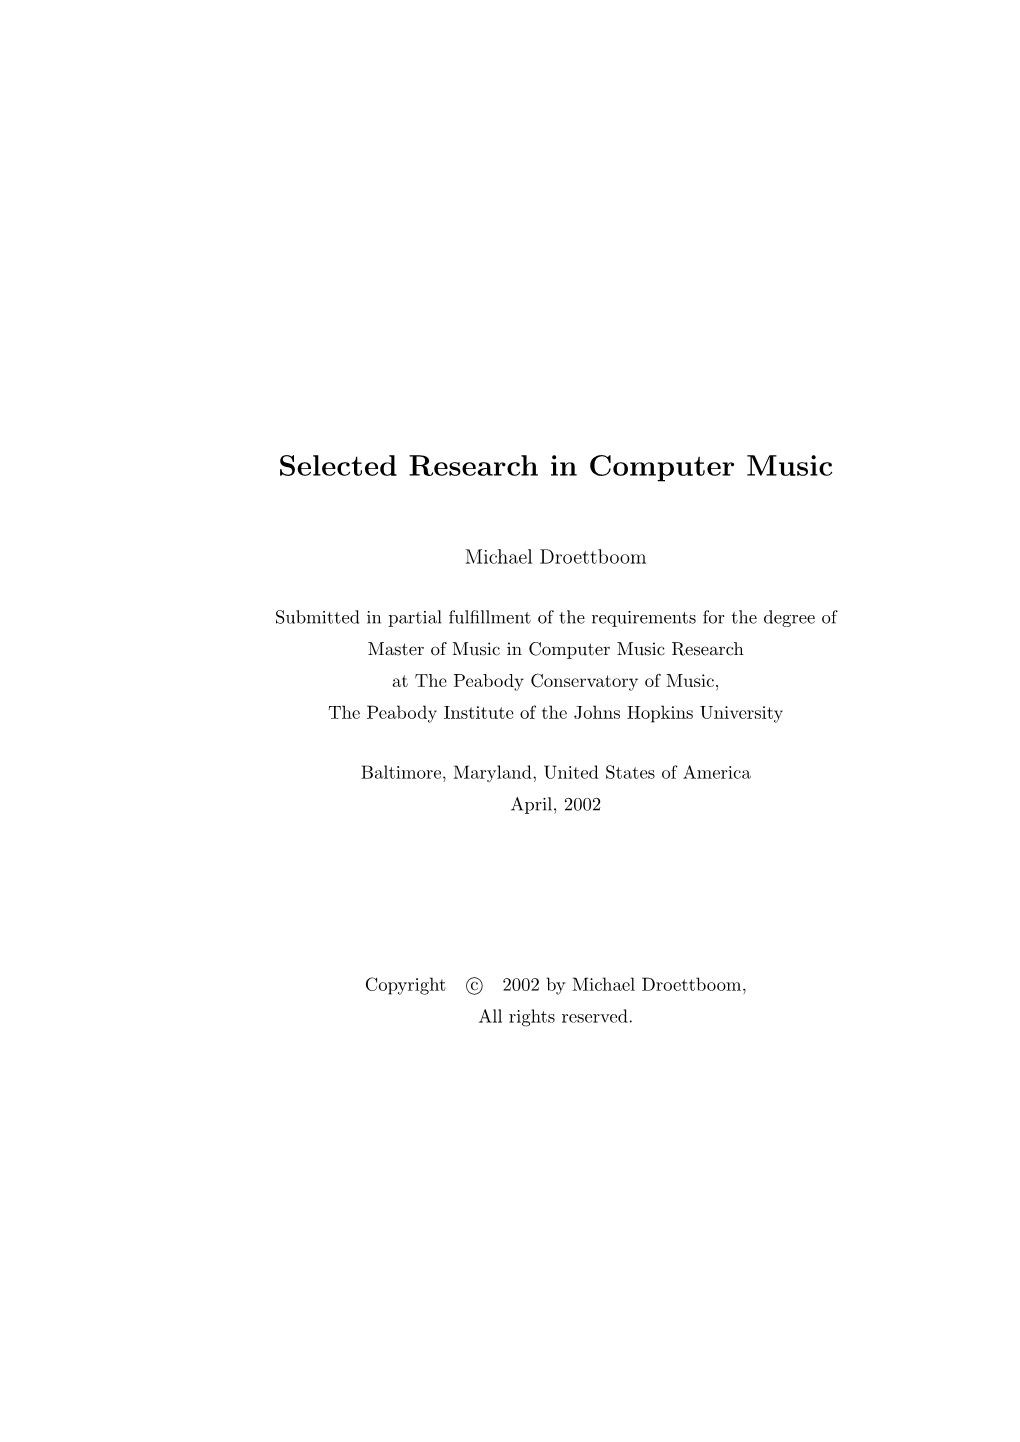 Selected Research in Computer Music